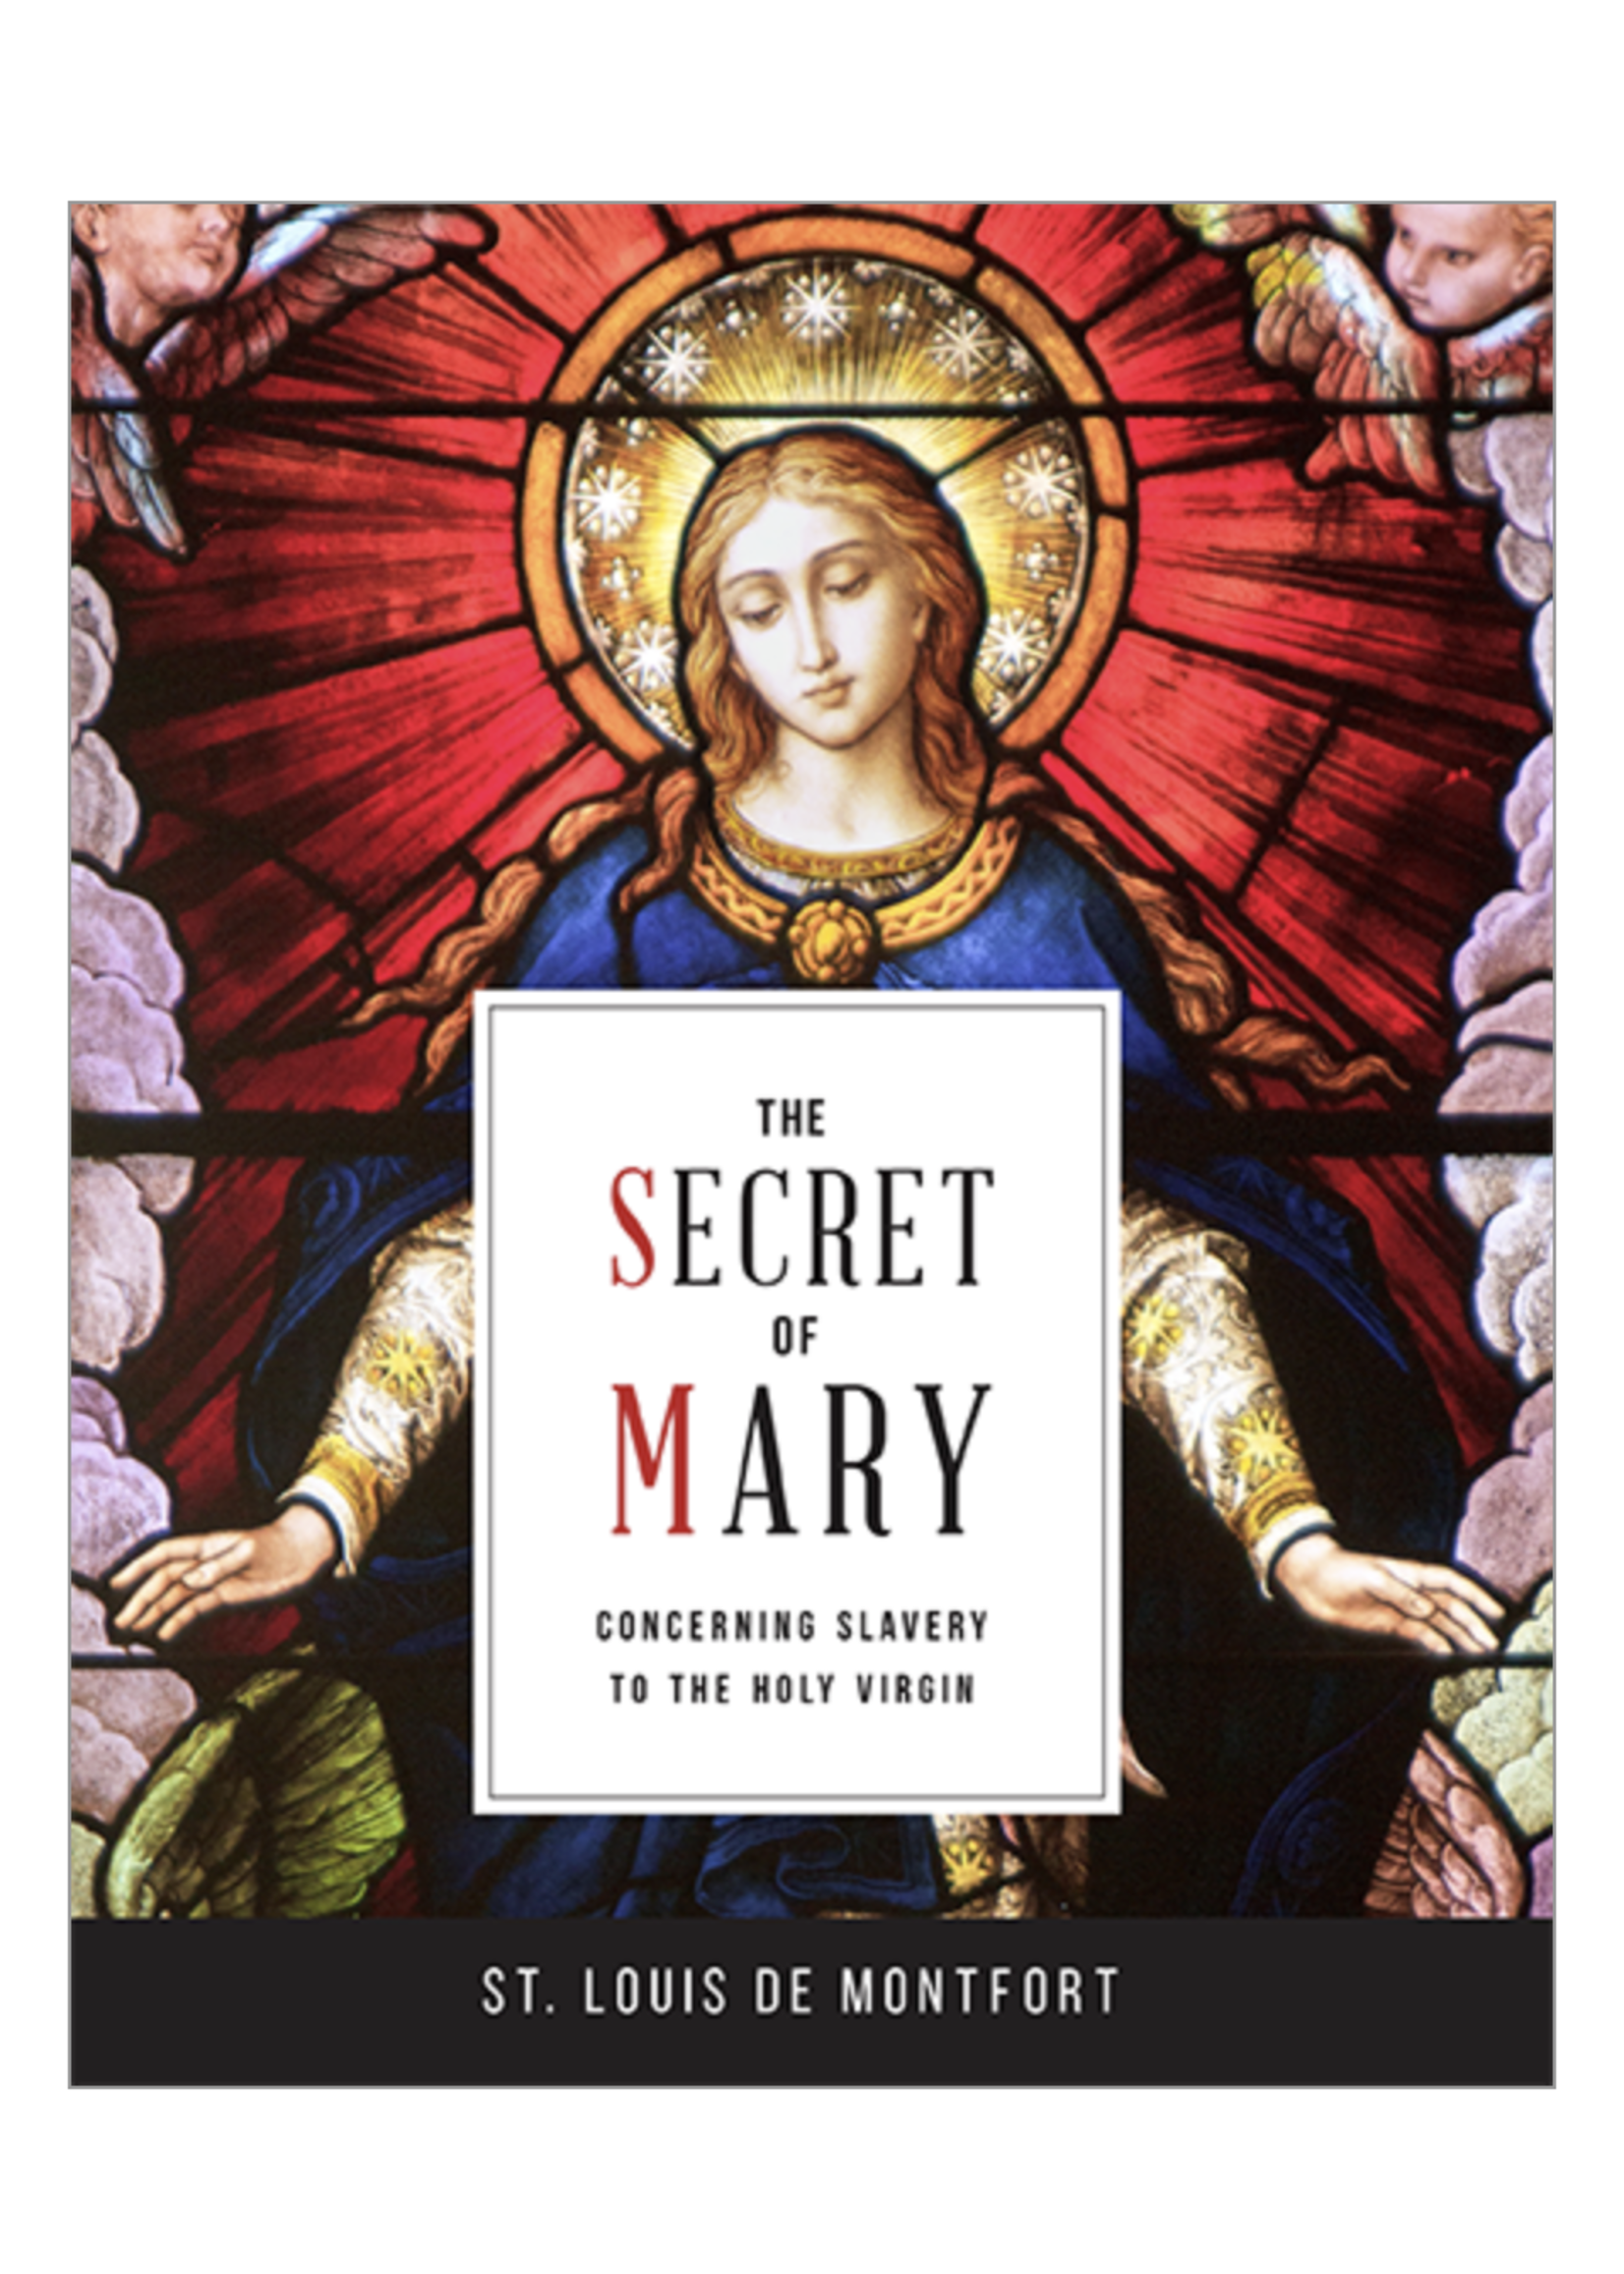 The Secret of Mary: Concerning Slavery to the Holy Virgin